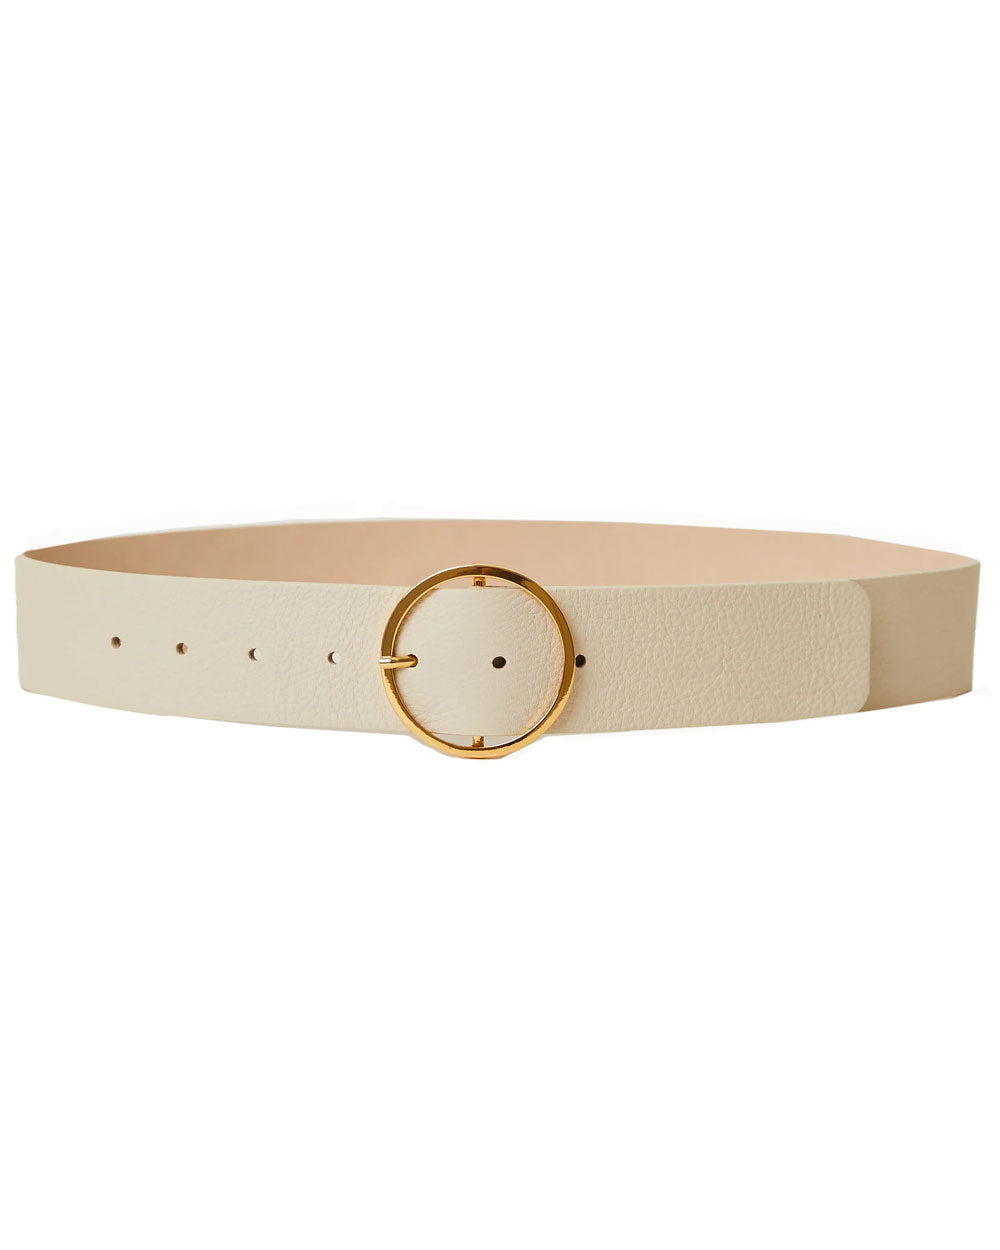 Molly Belt in Bone and Gold